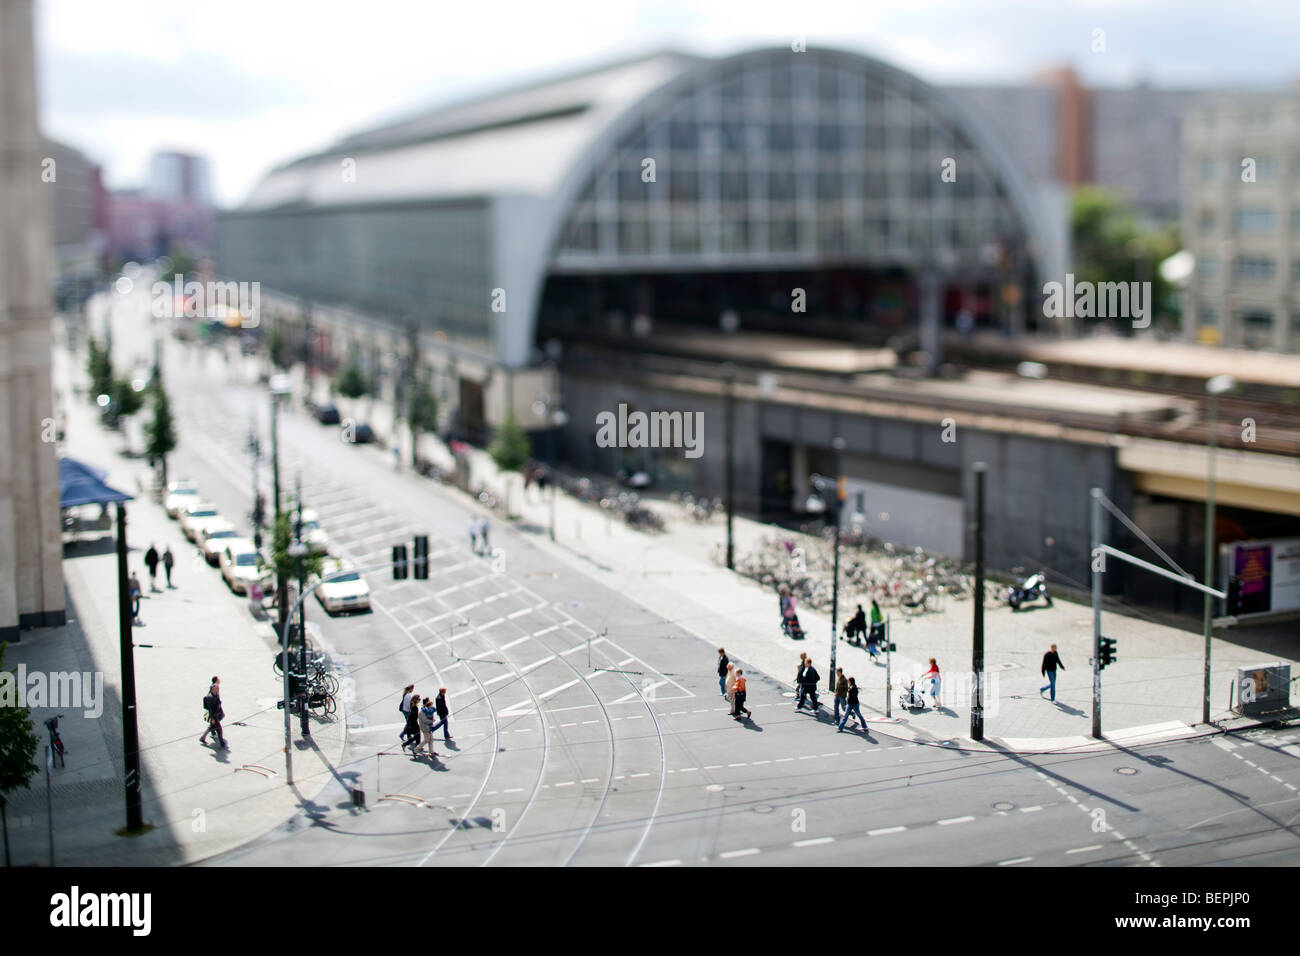 Walkers in front of Alexanderplatz station, Berlin, Germany. Tilted lens used for shallow depth of field. Stock Photo